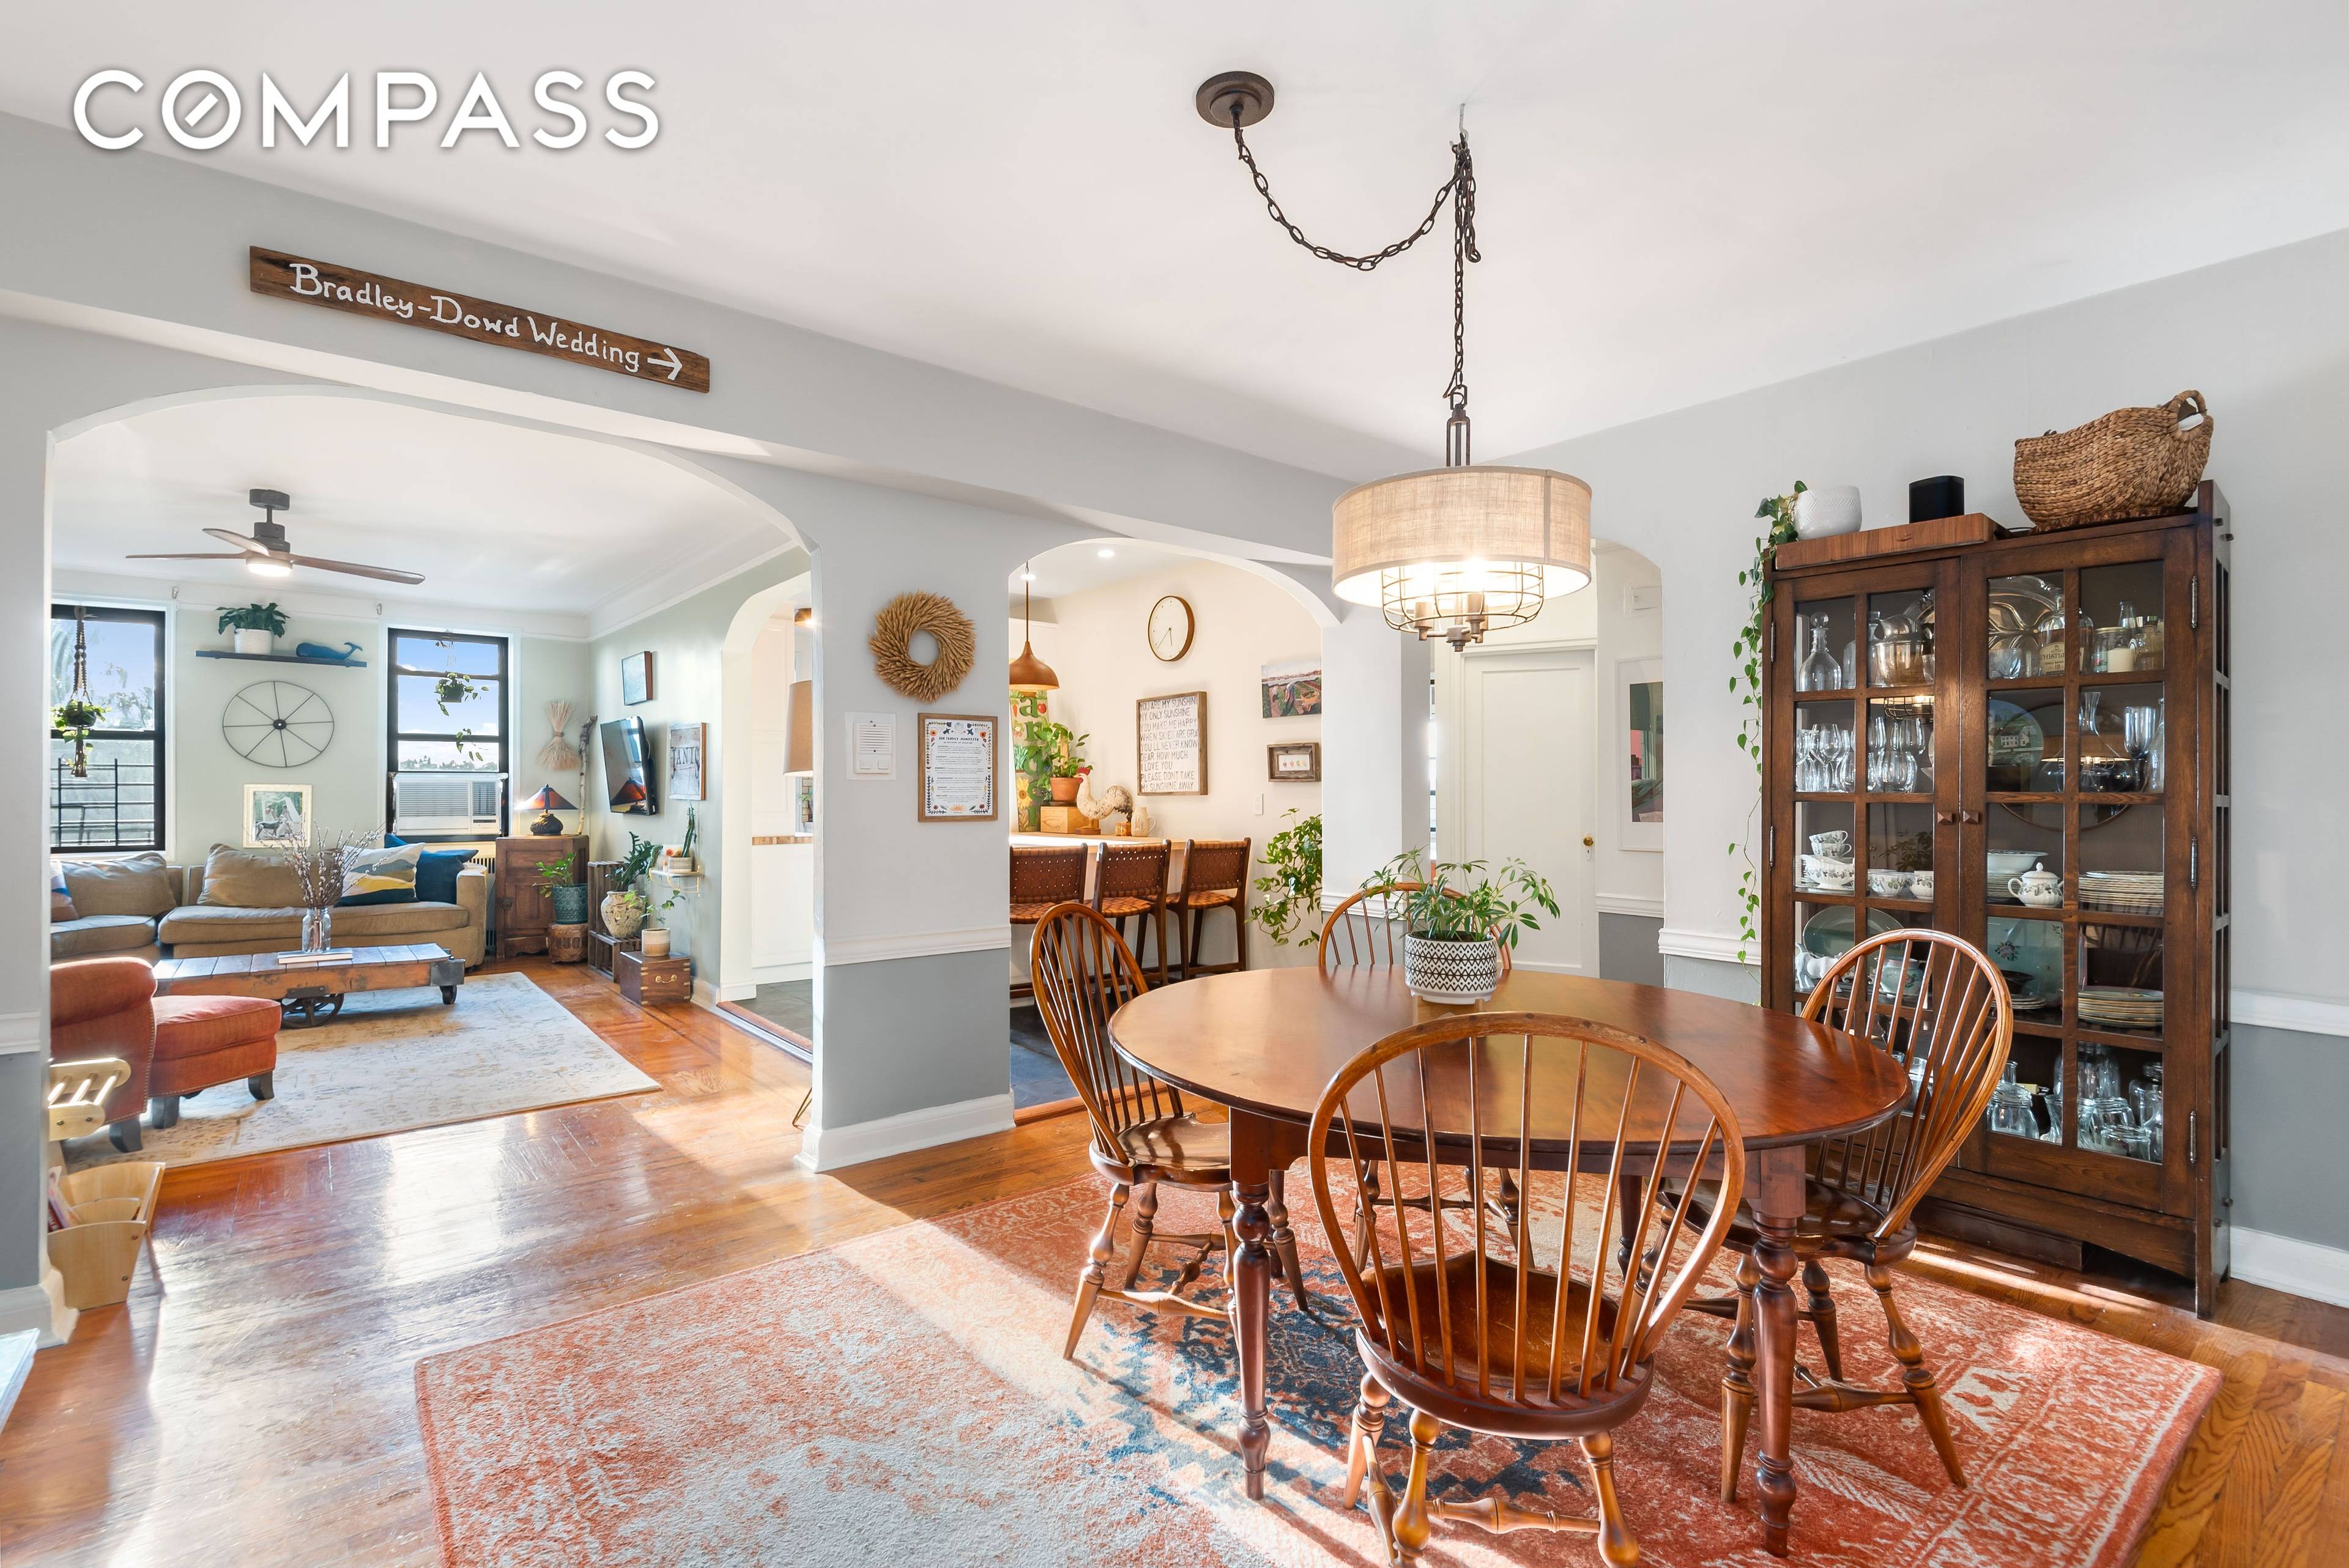 This Large Pre War two bedroom top floor co op has views and tremendous sunsets each evening in the South Midwood section of Flatbush steps away from Fiske Terrace.